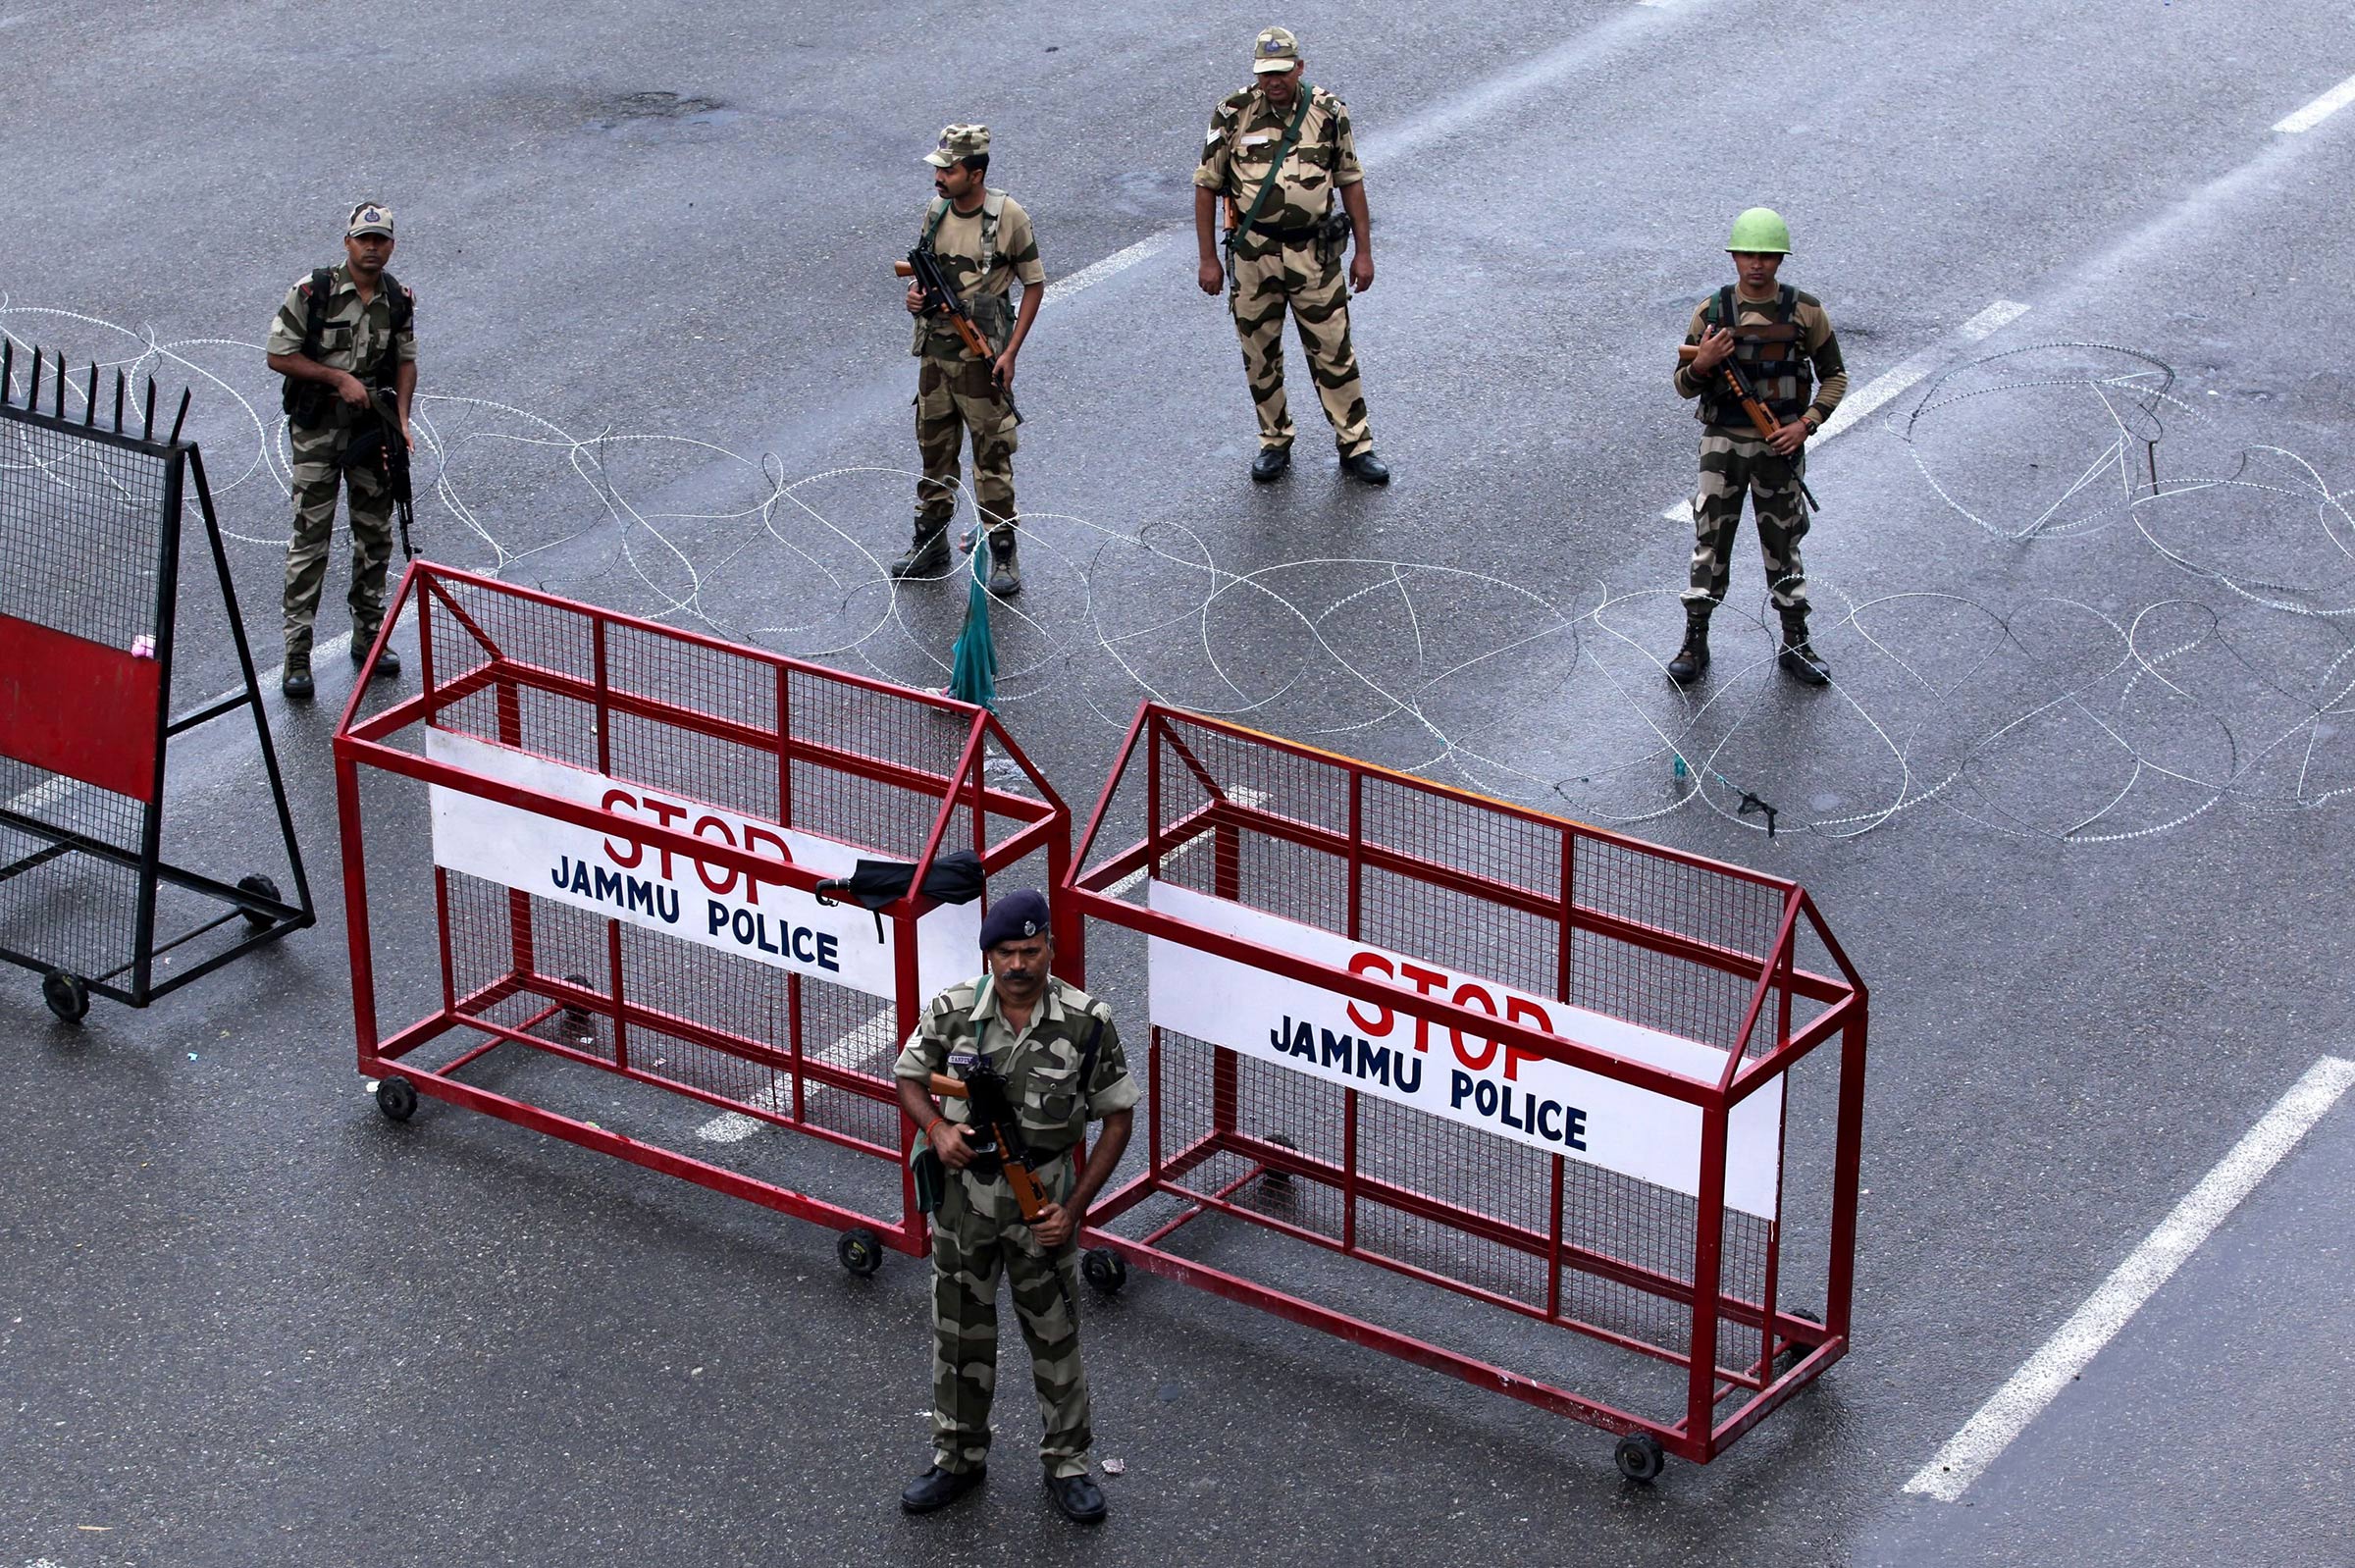 Security personnel stand guard at a roadblock in Jammu on August 7. A protester died after being chased by police during a curfew in Kashmir's main city, left in turmoil by an Indian government move to tighten control over the restive region, a police official said on August 7. (RAKESH BAKSHI—AFP/Getty Images)